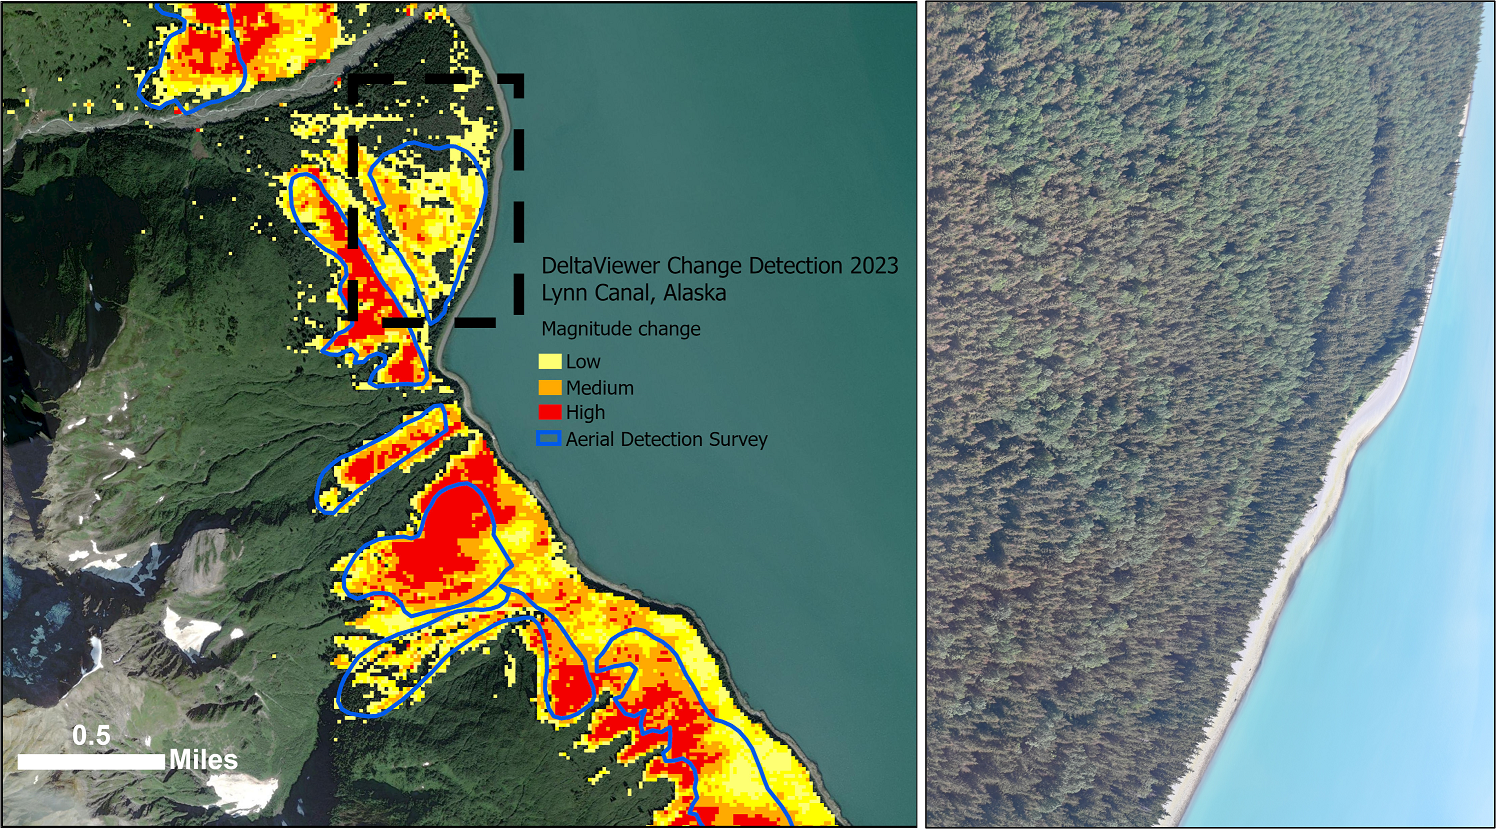 Forest change detected with Sentinel-2 imagery is depicted in yellow, orange, and red, based on the